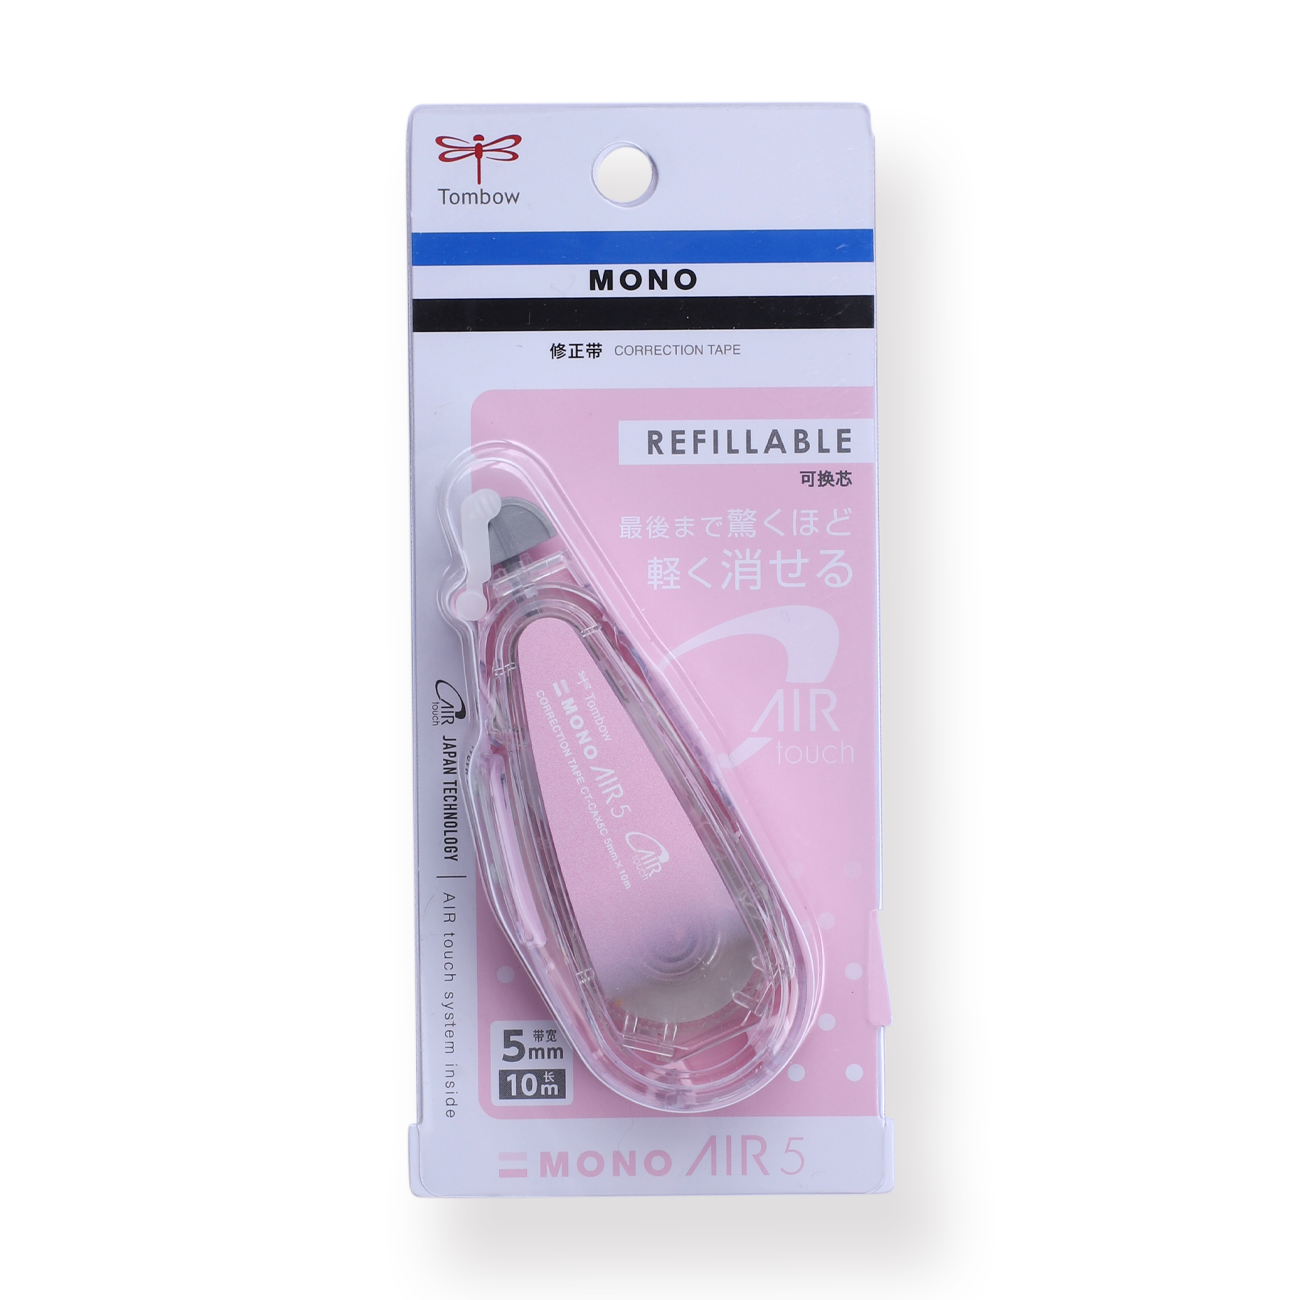 Tombow MONO Air 5 Correction Tape - Gradient Pink Body - Stationery Pal